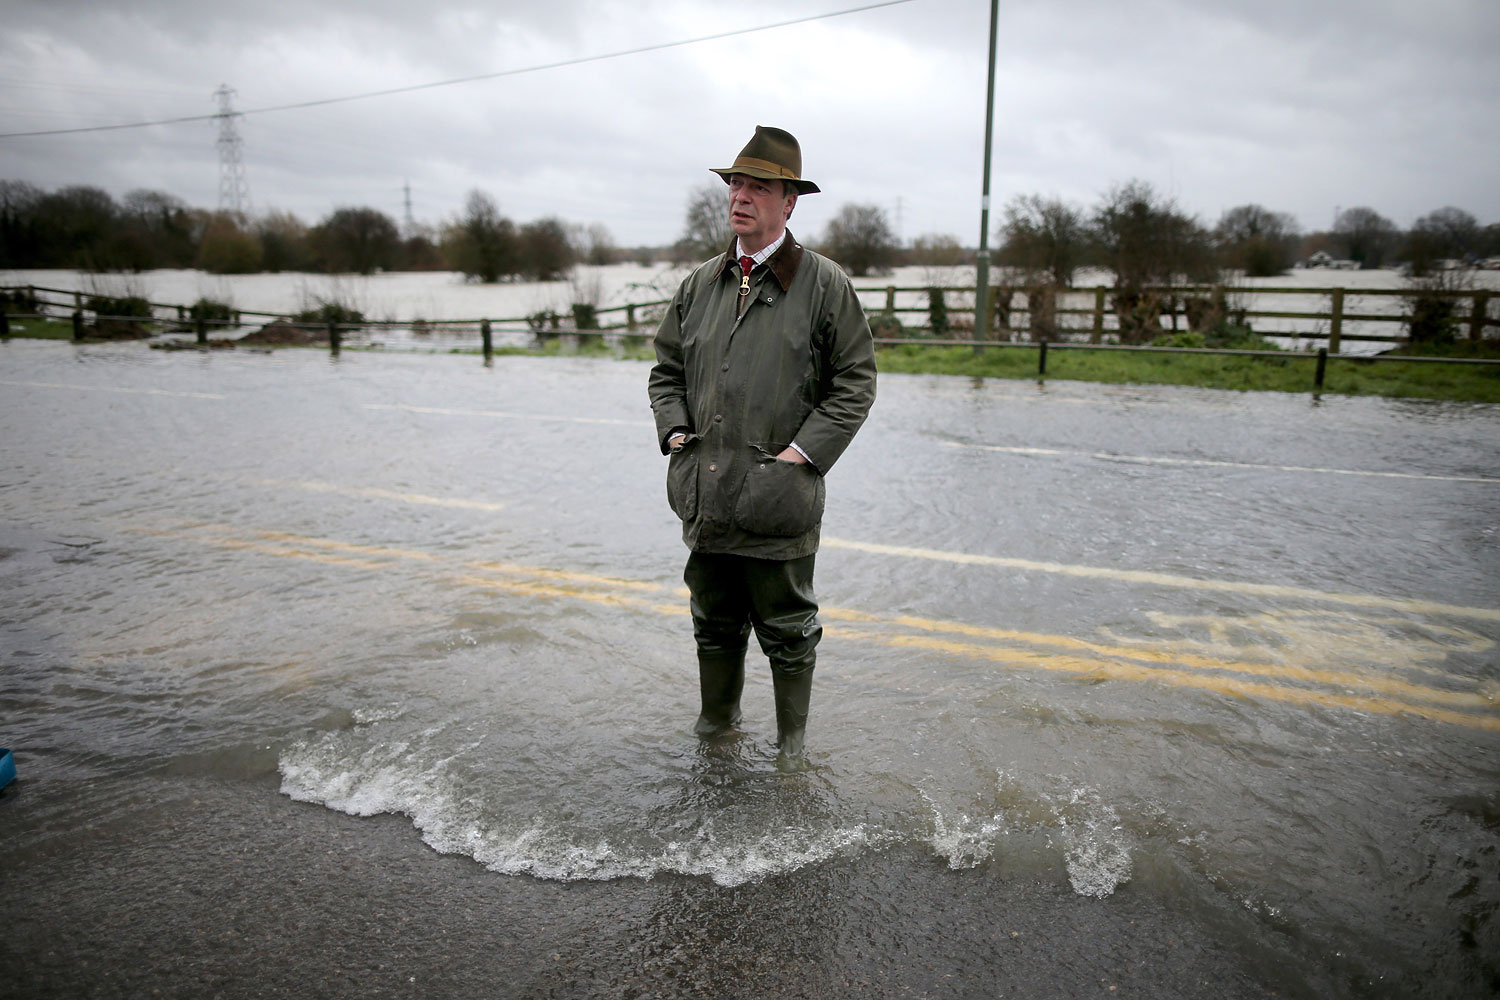 Leader of UKIP Nigel Farage tours flooded properties  and roads as he visits Chertsey on Feb. 11, 2014 in Chertsey, United Kingdom. 